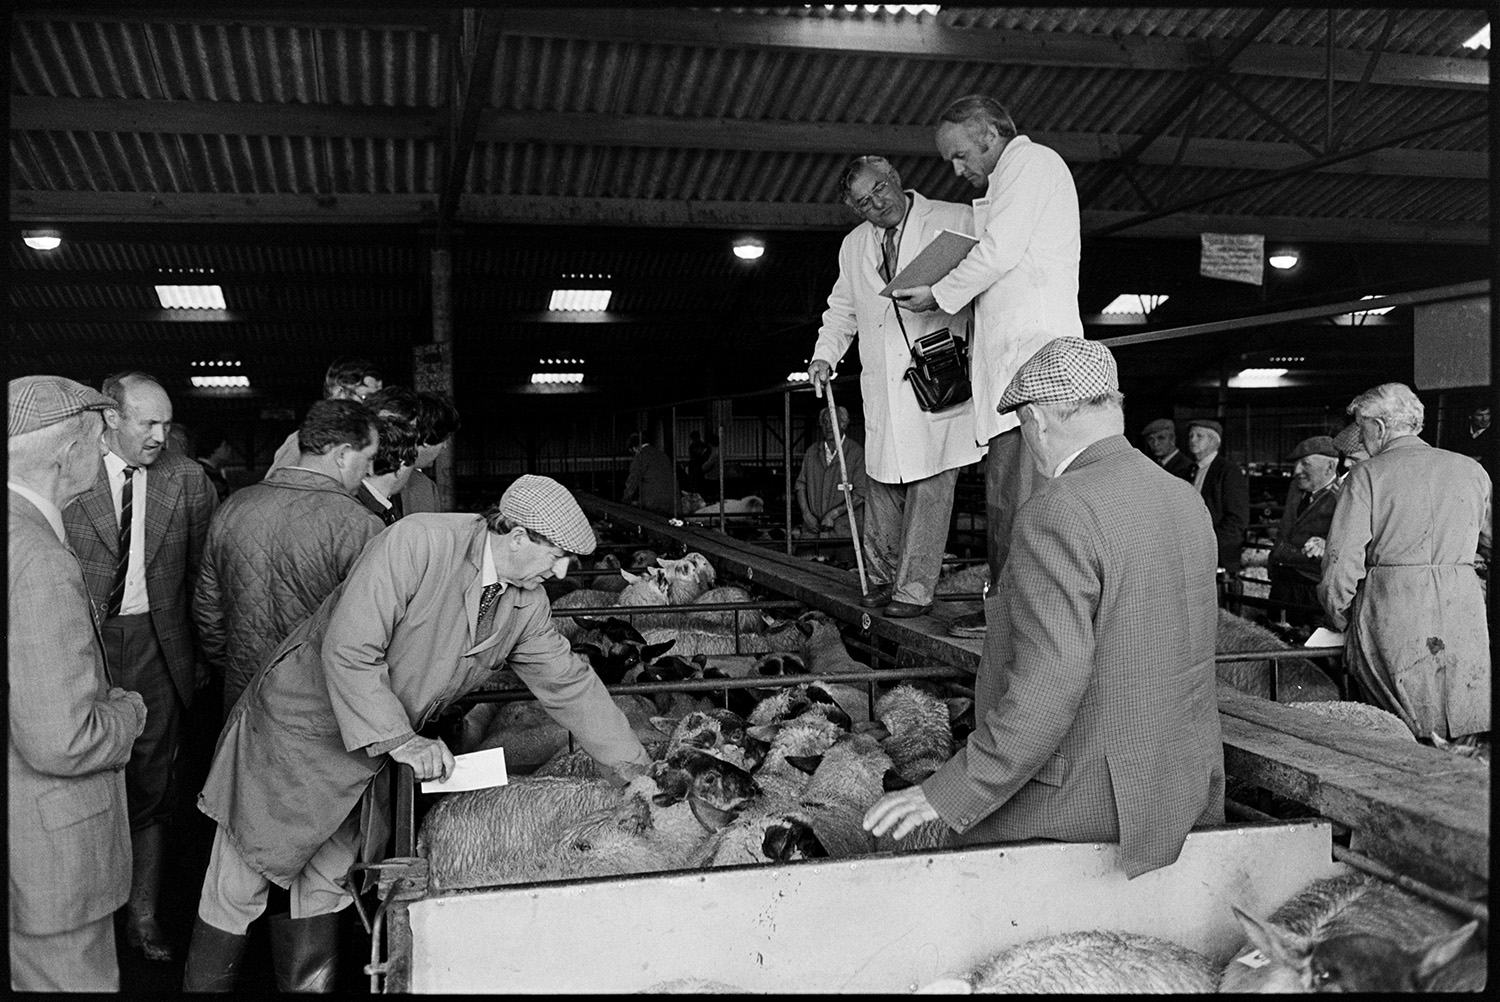 Farmers at market, sheep, cattle being auctioned in ring. 
[Two men auctioning sheep in pens at Holsworthy Market. They are stood above the pens. Men are gathered around looking at the sheep and a man is inspecting one of the sheep in the pen in the foreground.]